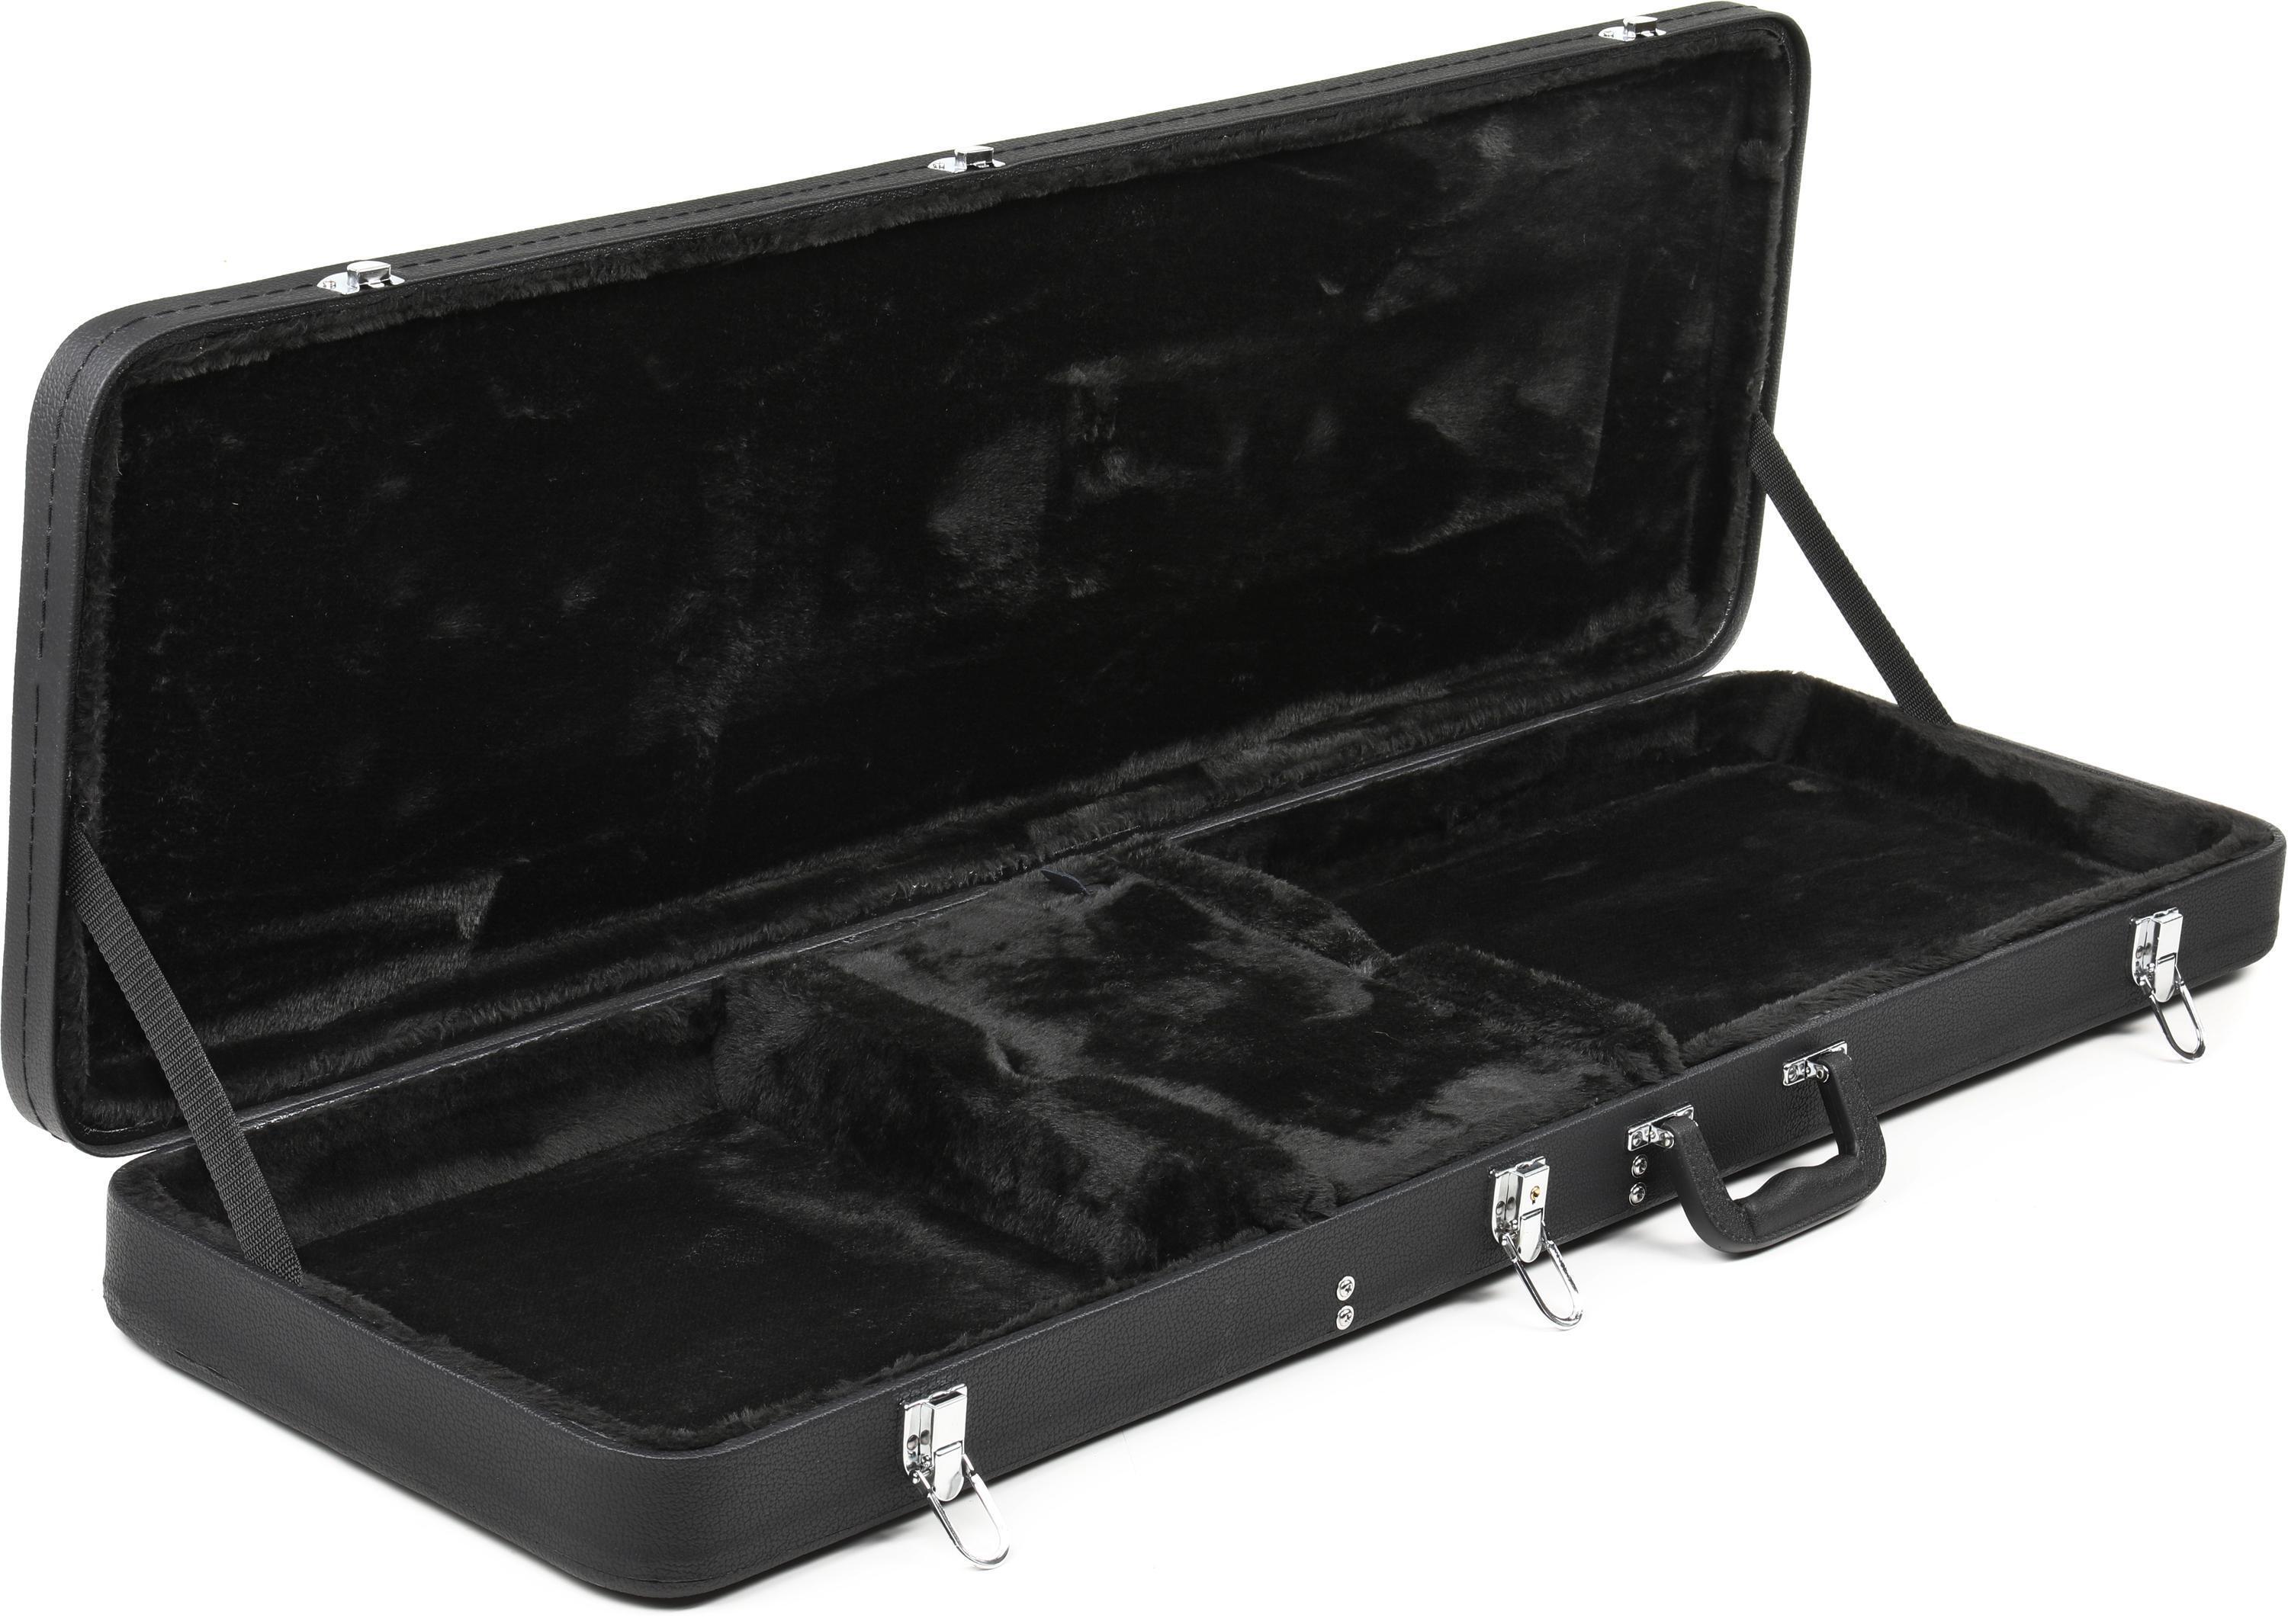 Jackson V Series Guitar Case | Sweetwater